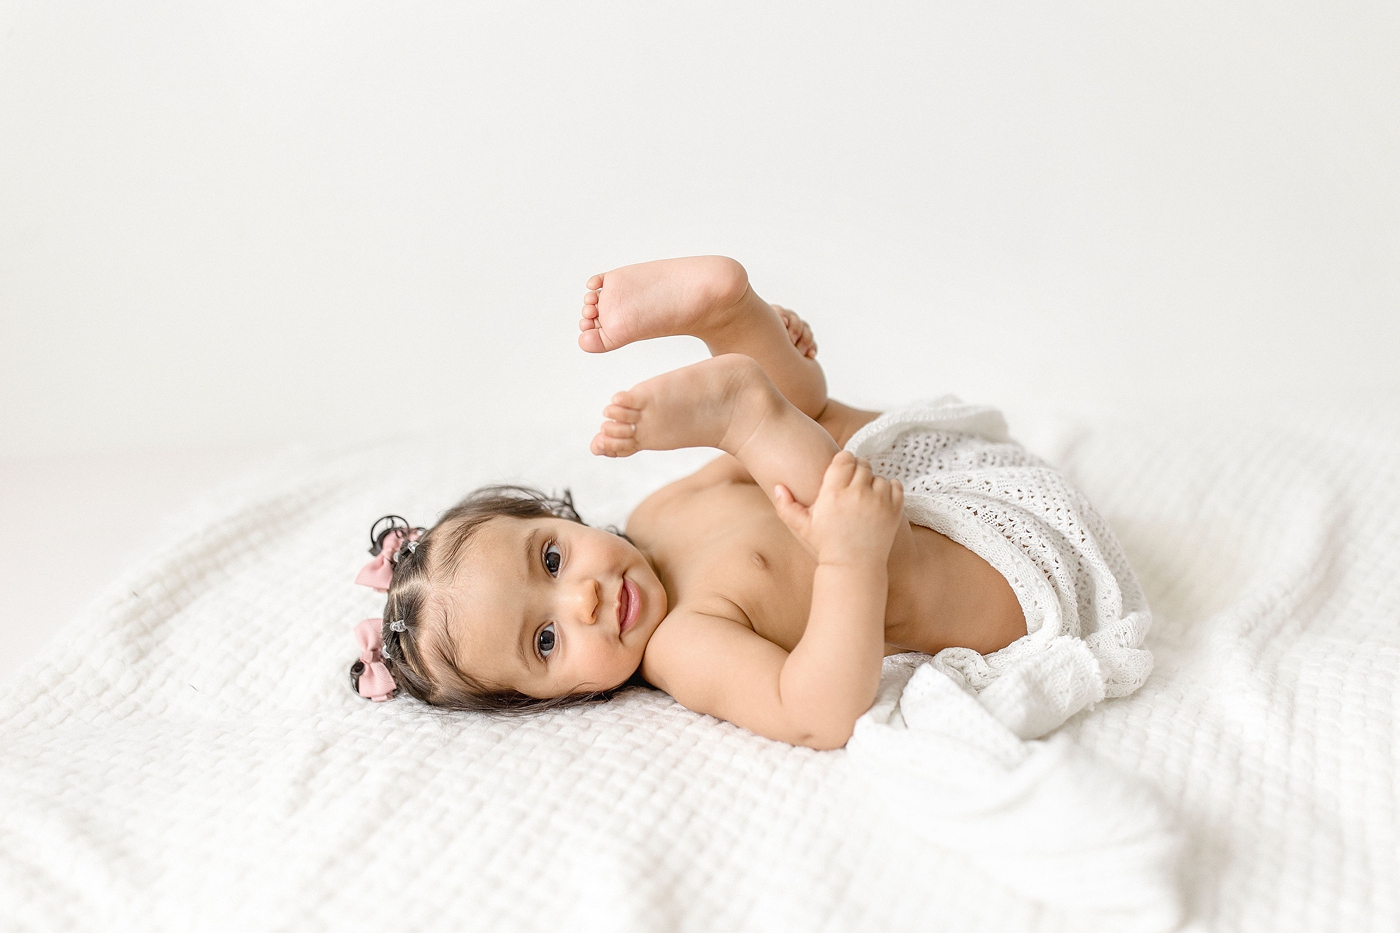 Baby girl shows off her toes during milestone baby photography miami session. Photo by Ivanna Vidal Photography.